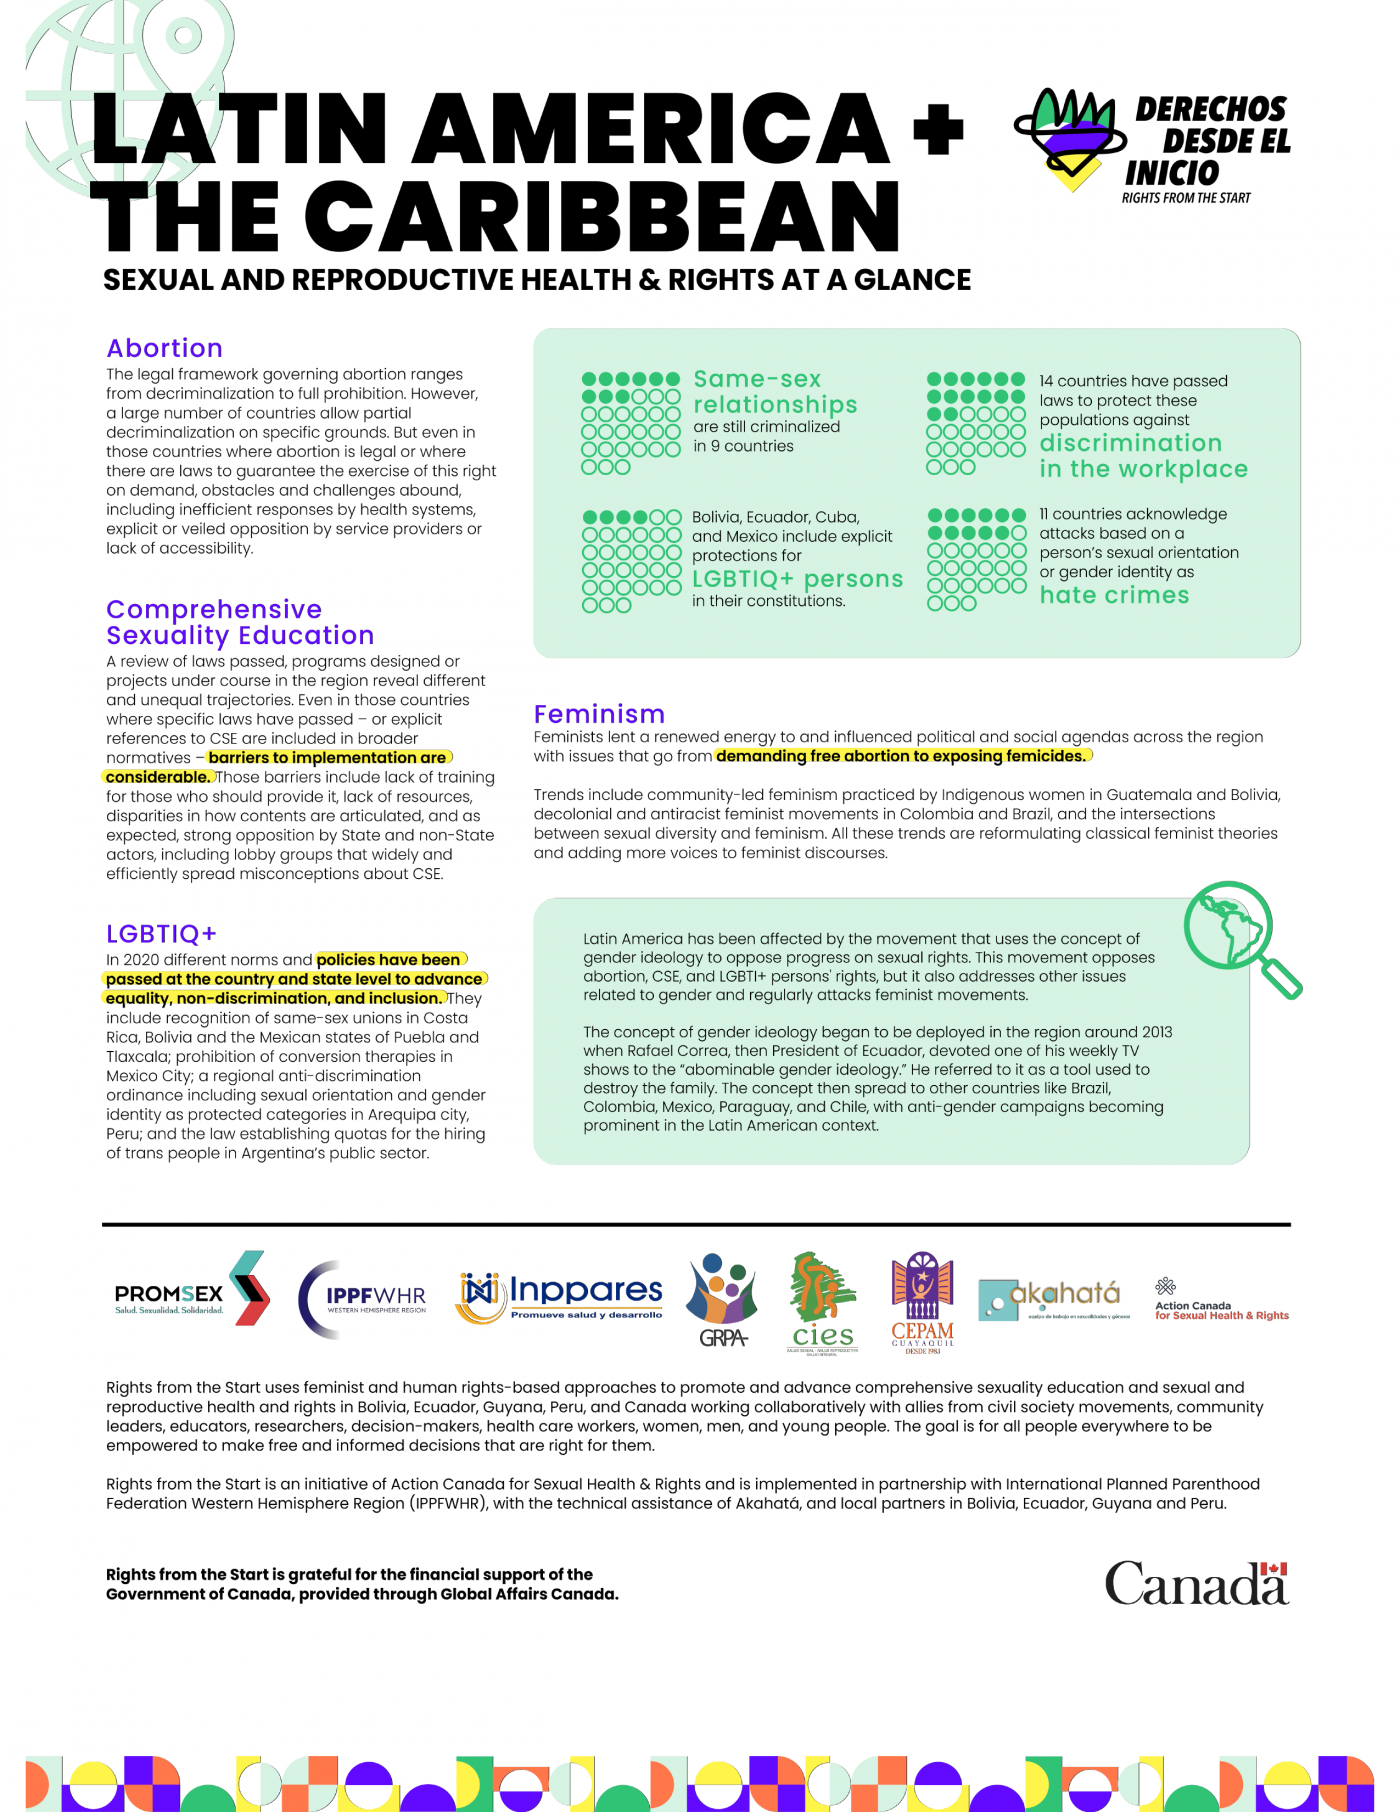 Information about SRHR in Latin America and the Caribbean